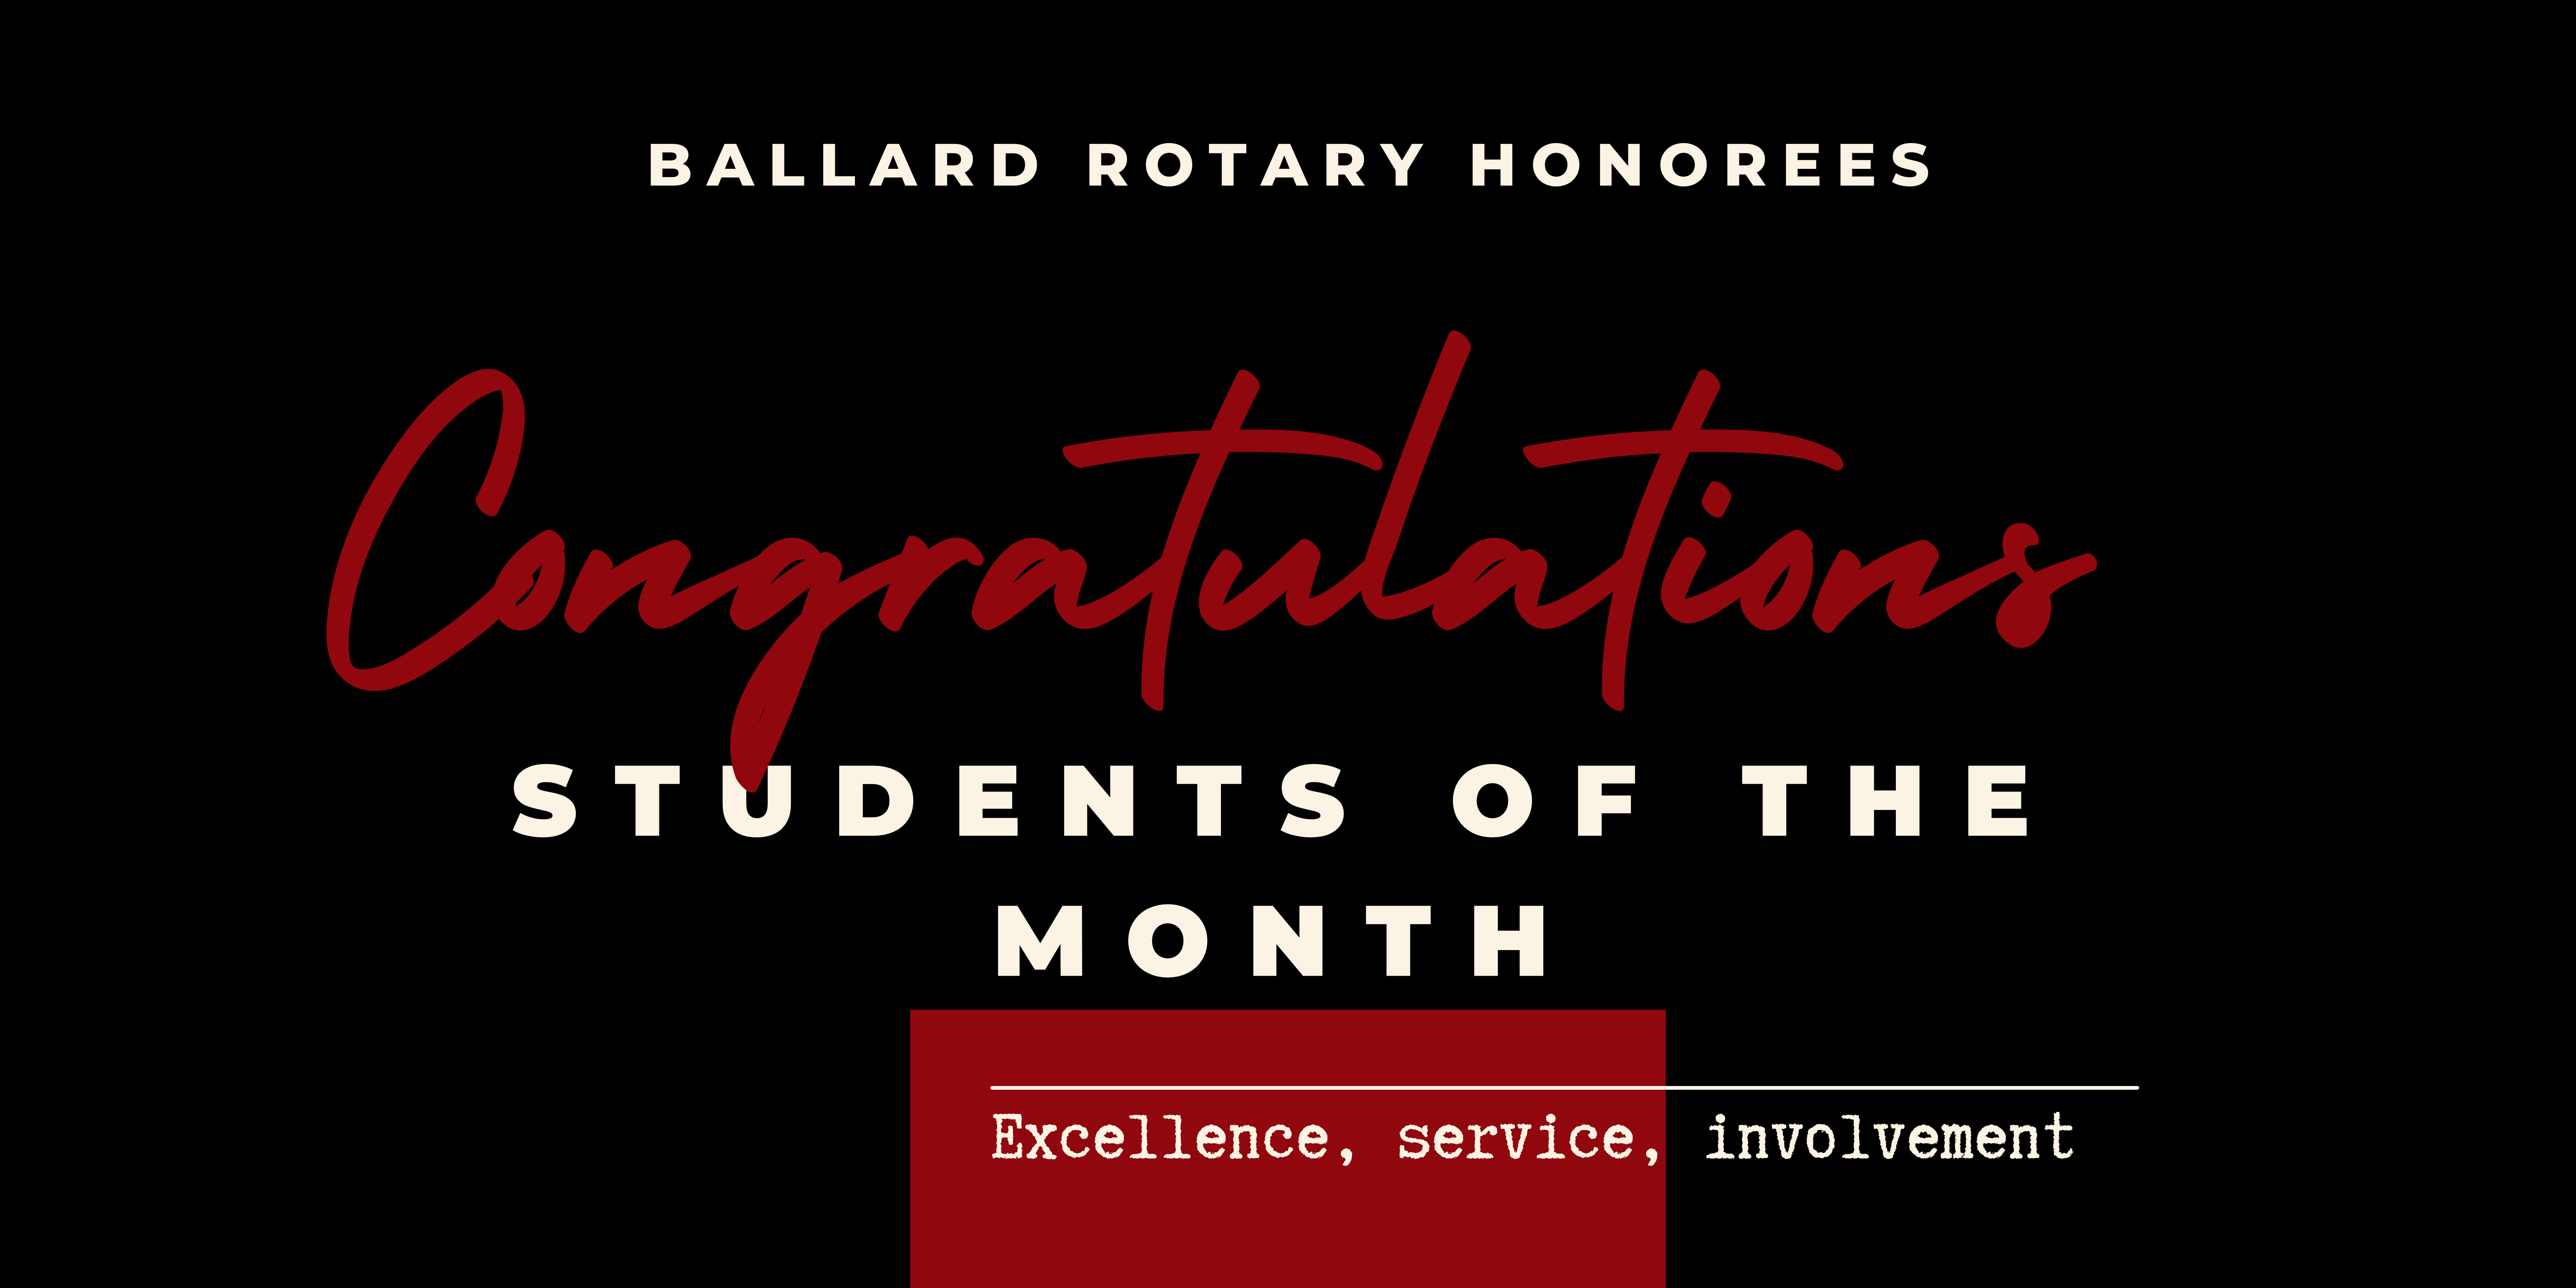 Ballard Rotary Honorees Logo. Text: Congratulations Students of the Month